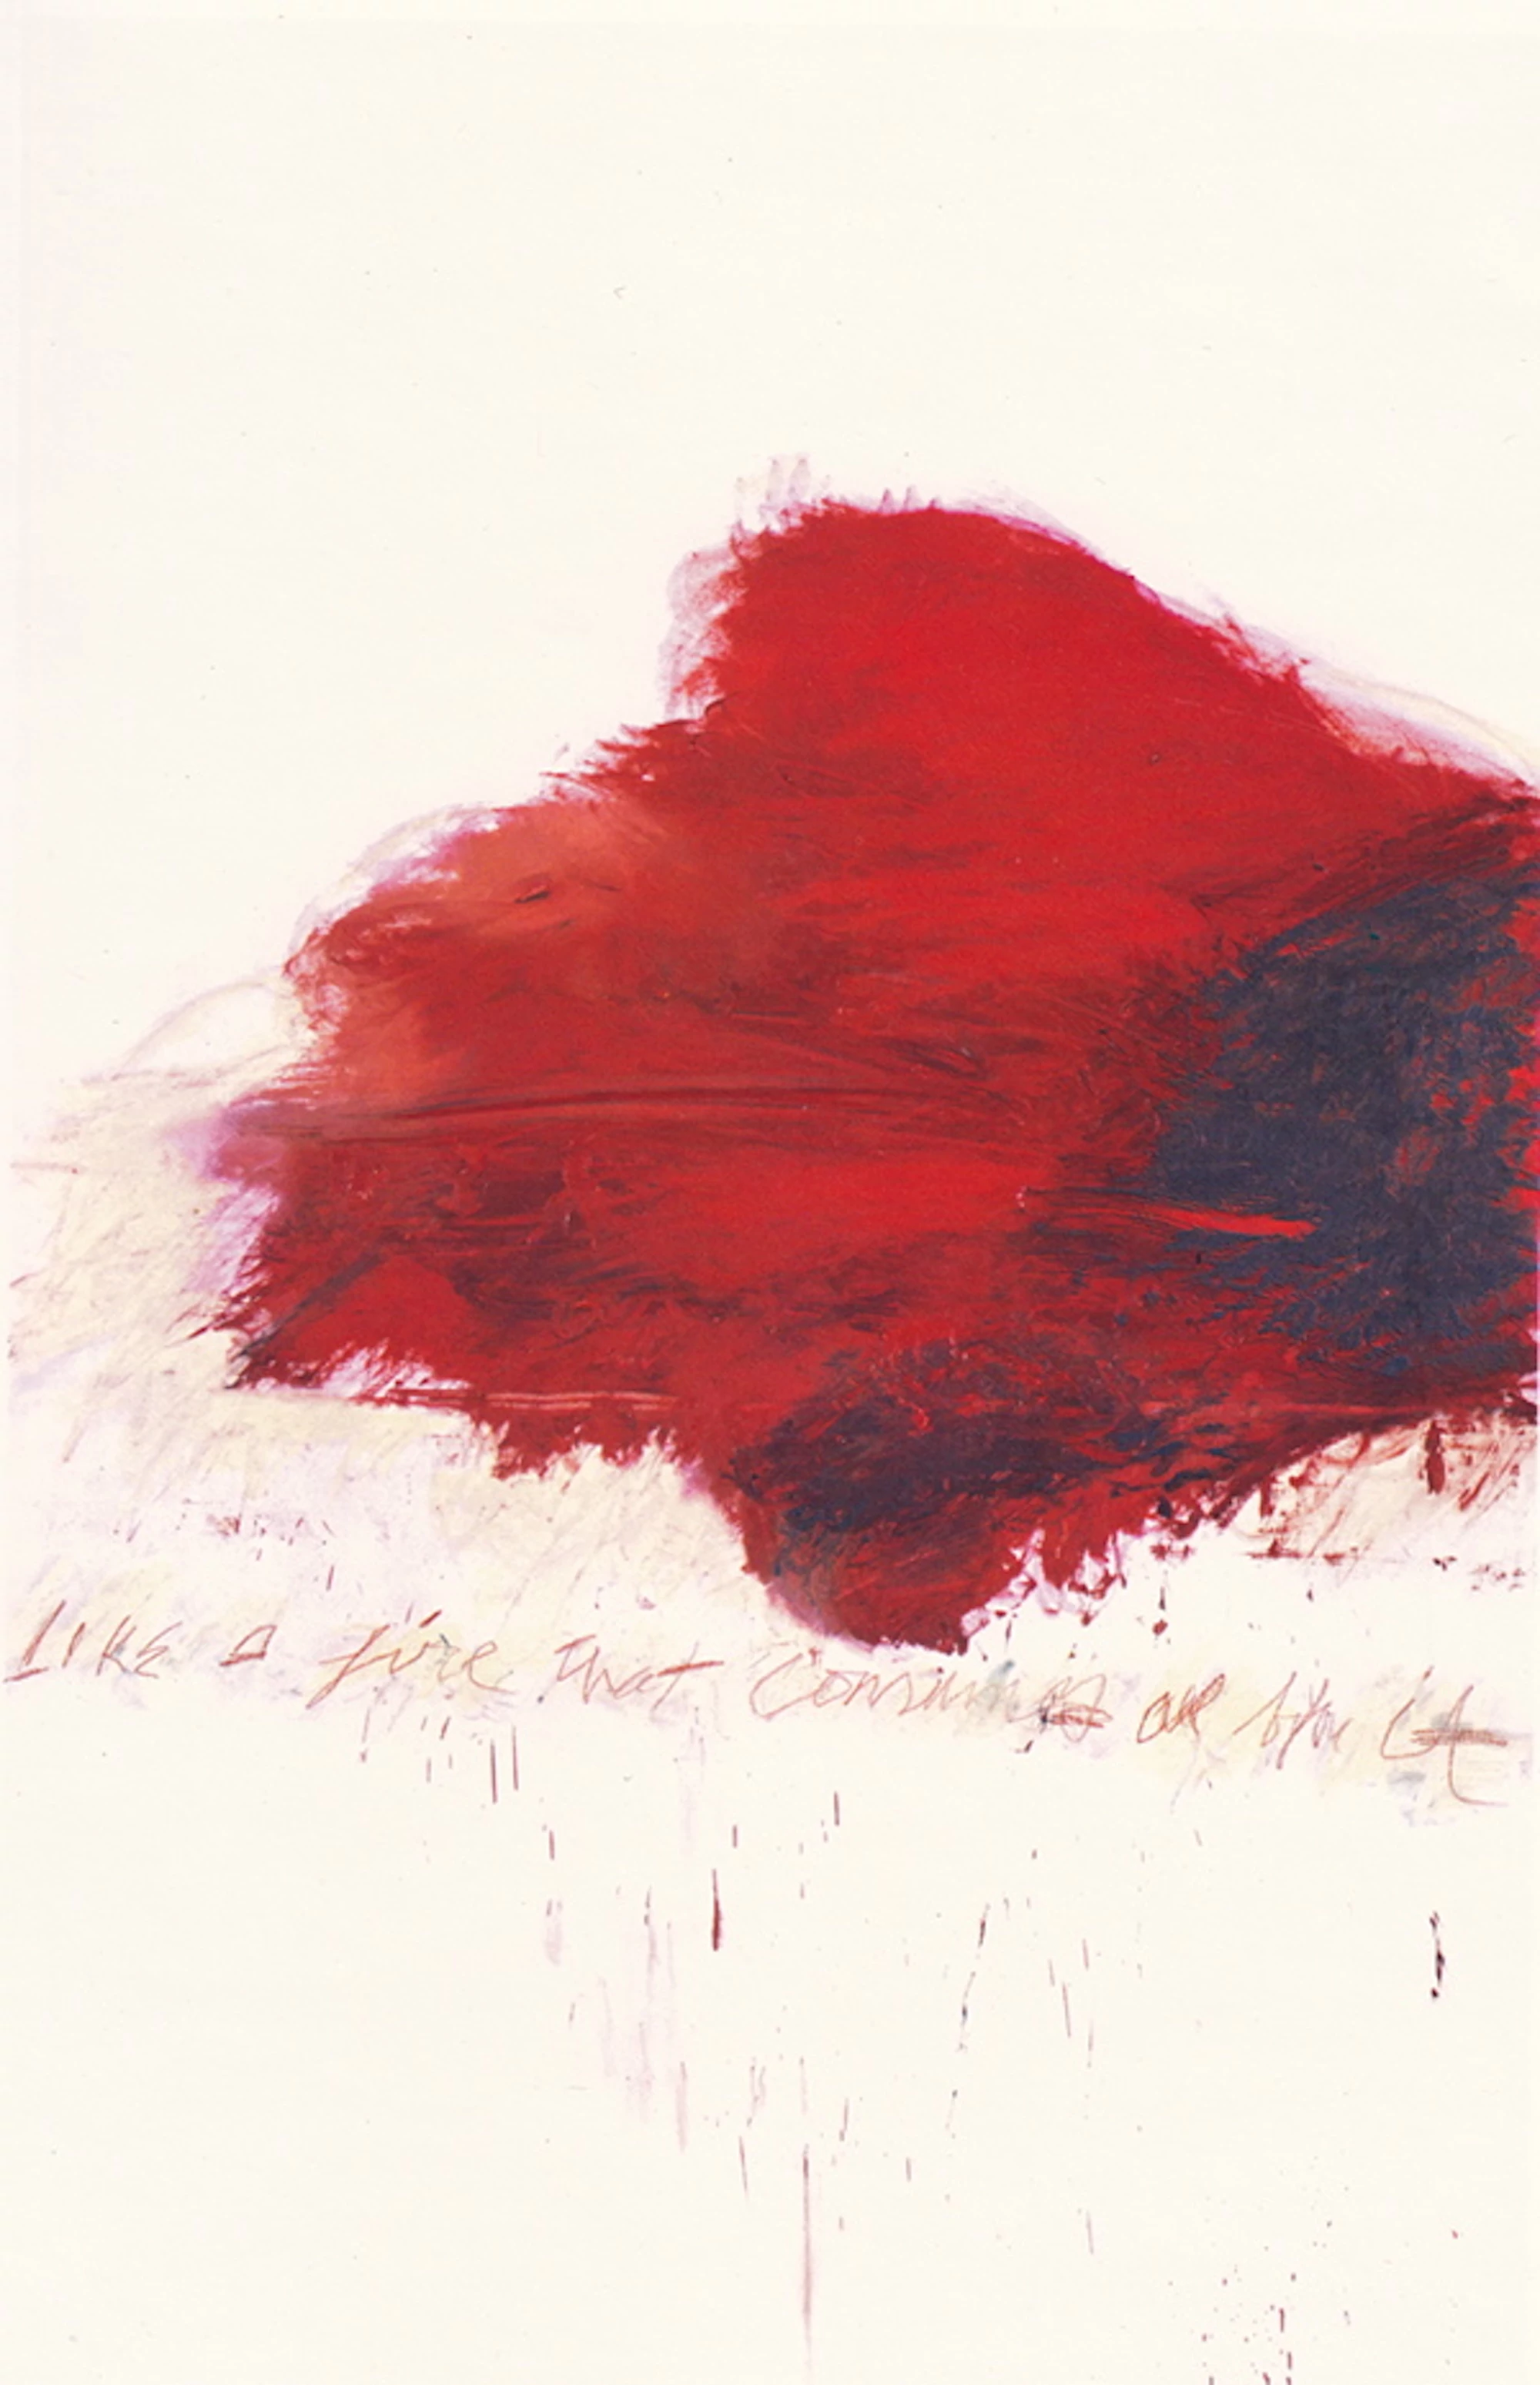 Fifty Days at Iliam: The Fire that Consumes All before It, Cy Twombly